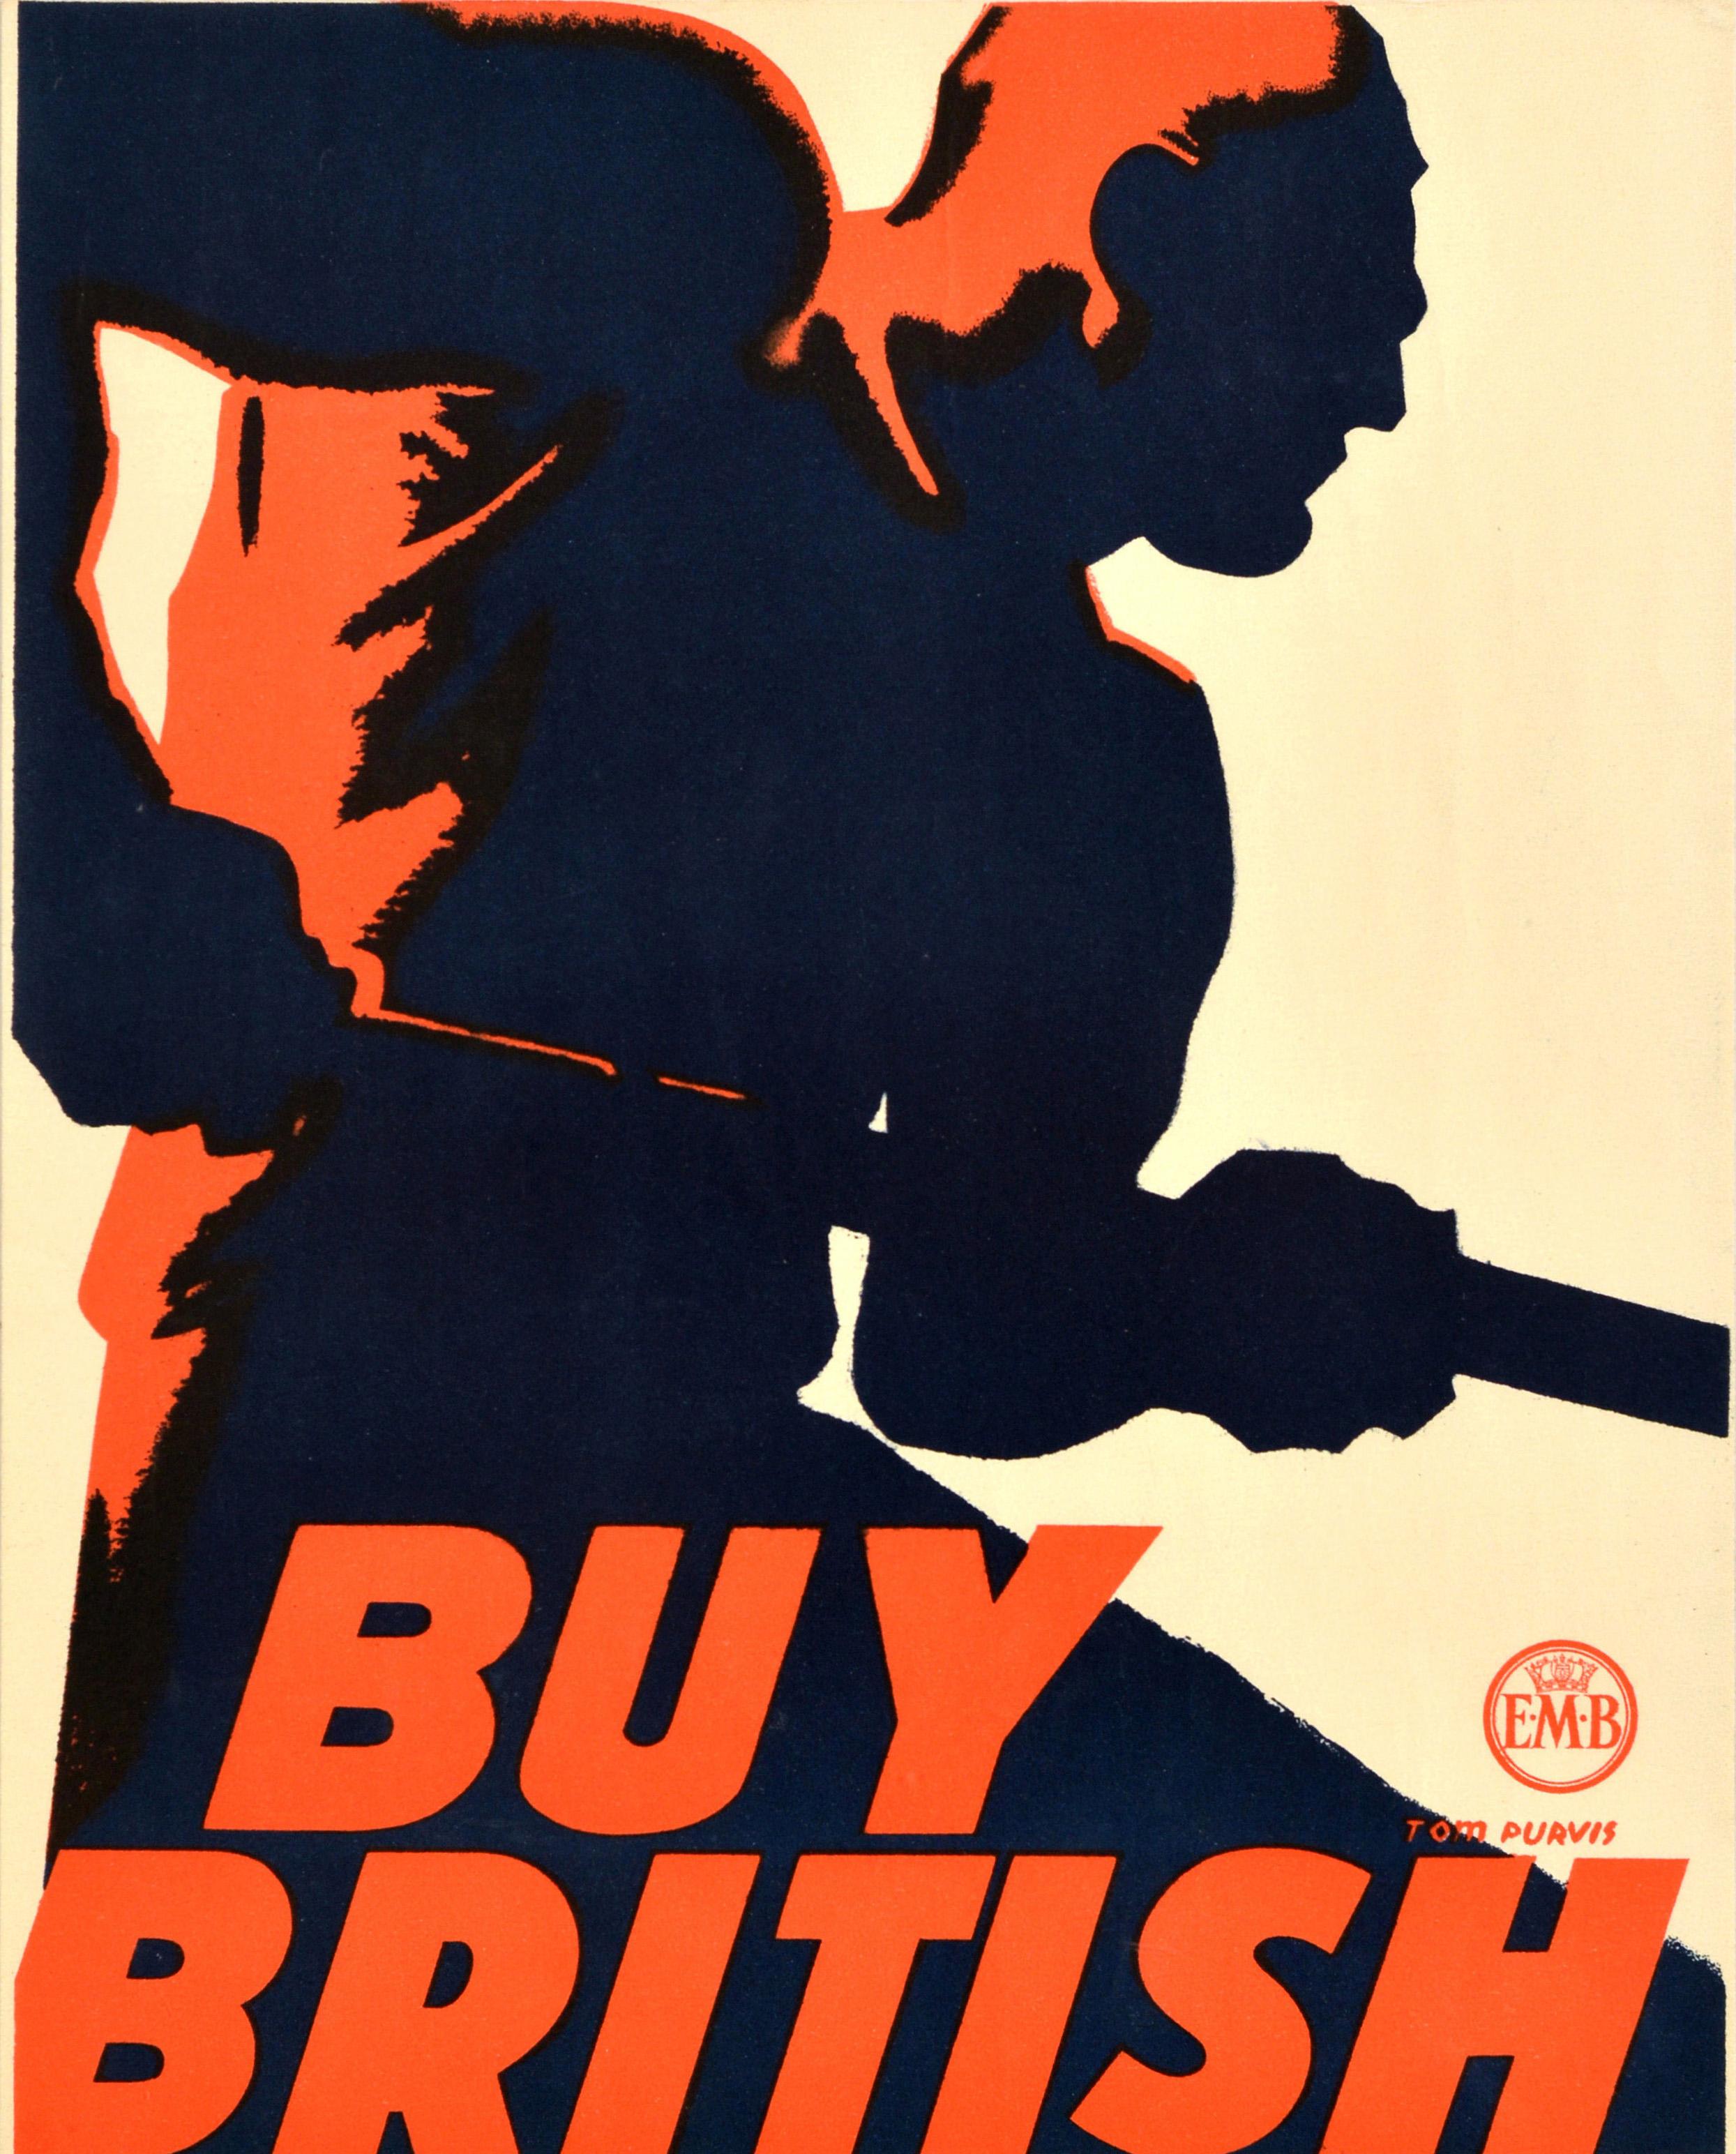 Original Vintage Poster Buy British Tom Purvis EMB Empire Marketing Board In Good Condition For Sale In London, GB